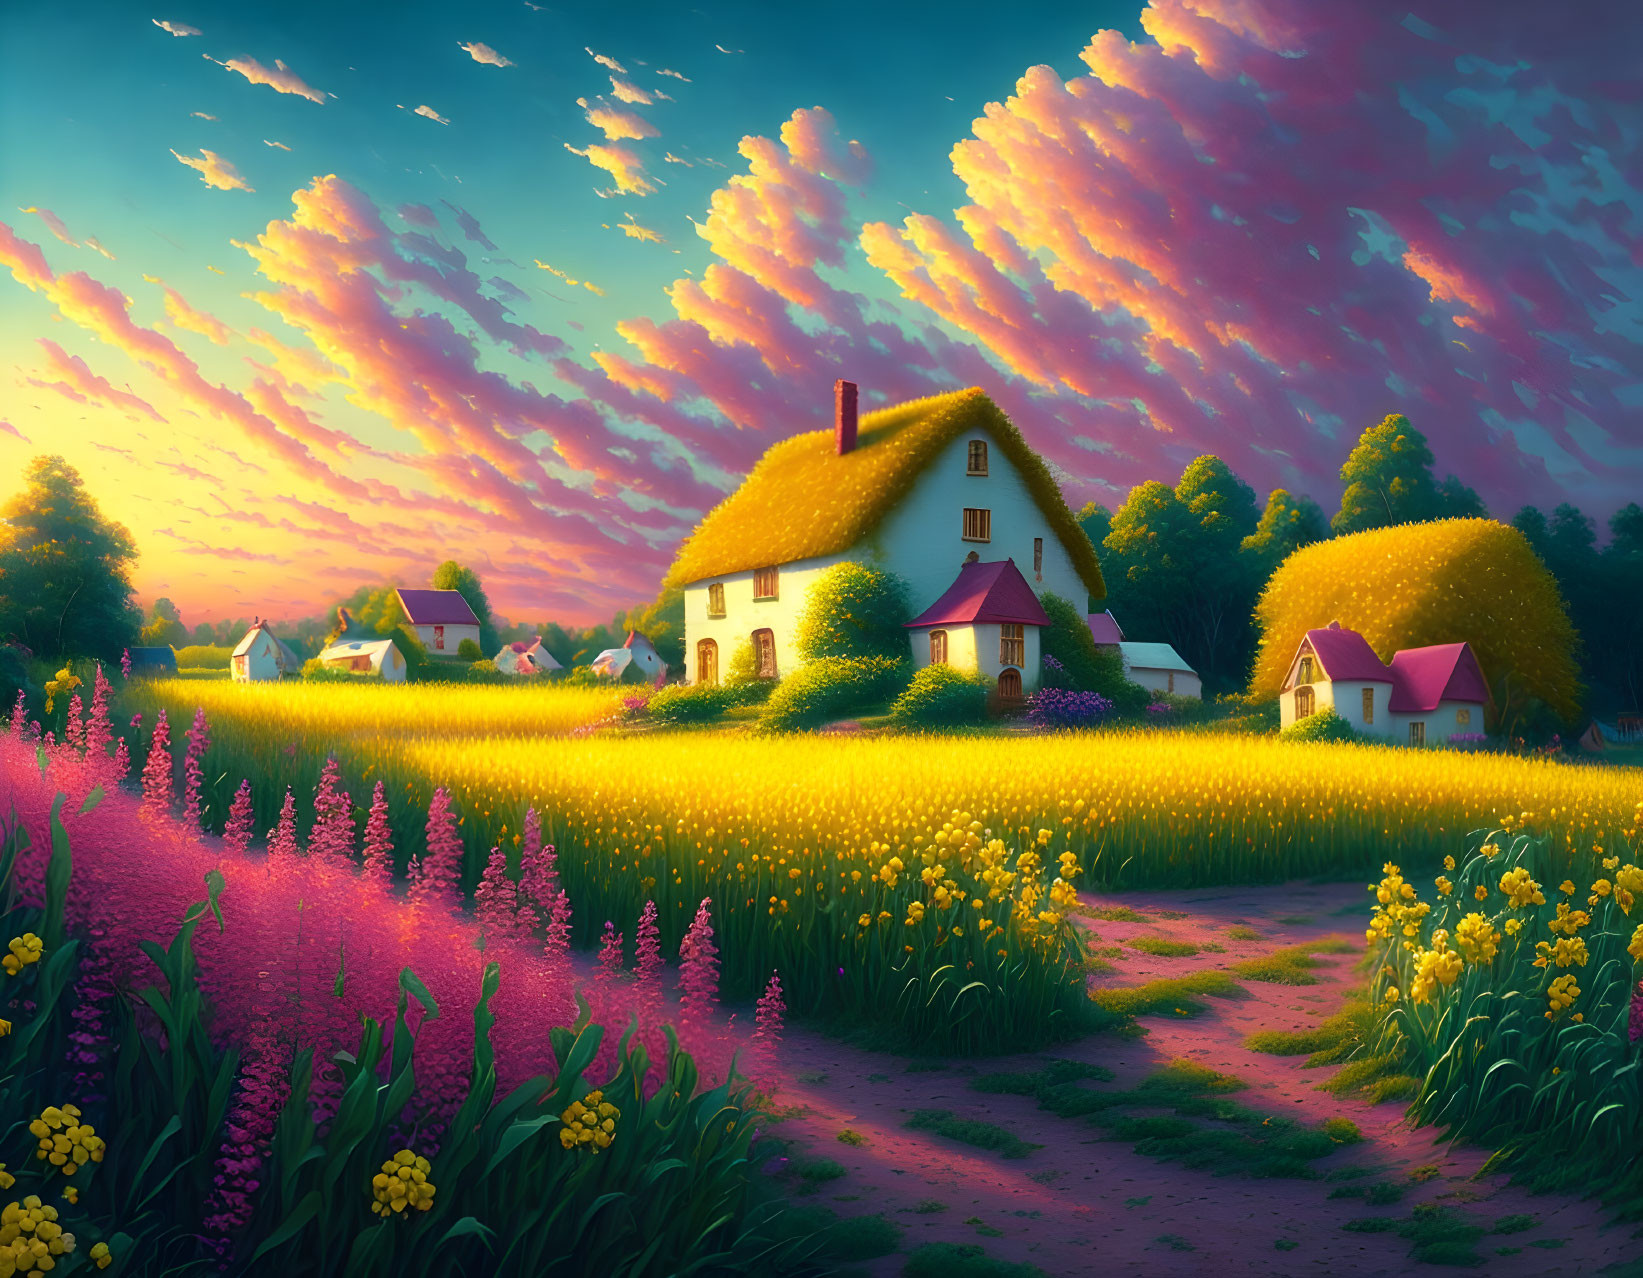 Vibrant flower fields and quaint cottage under pink sunset sky